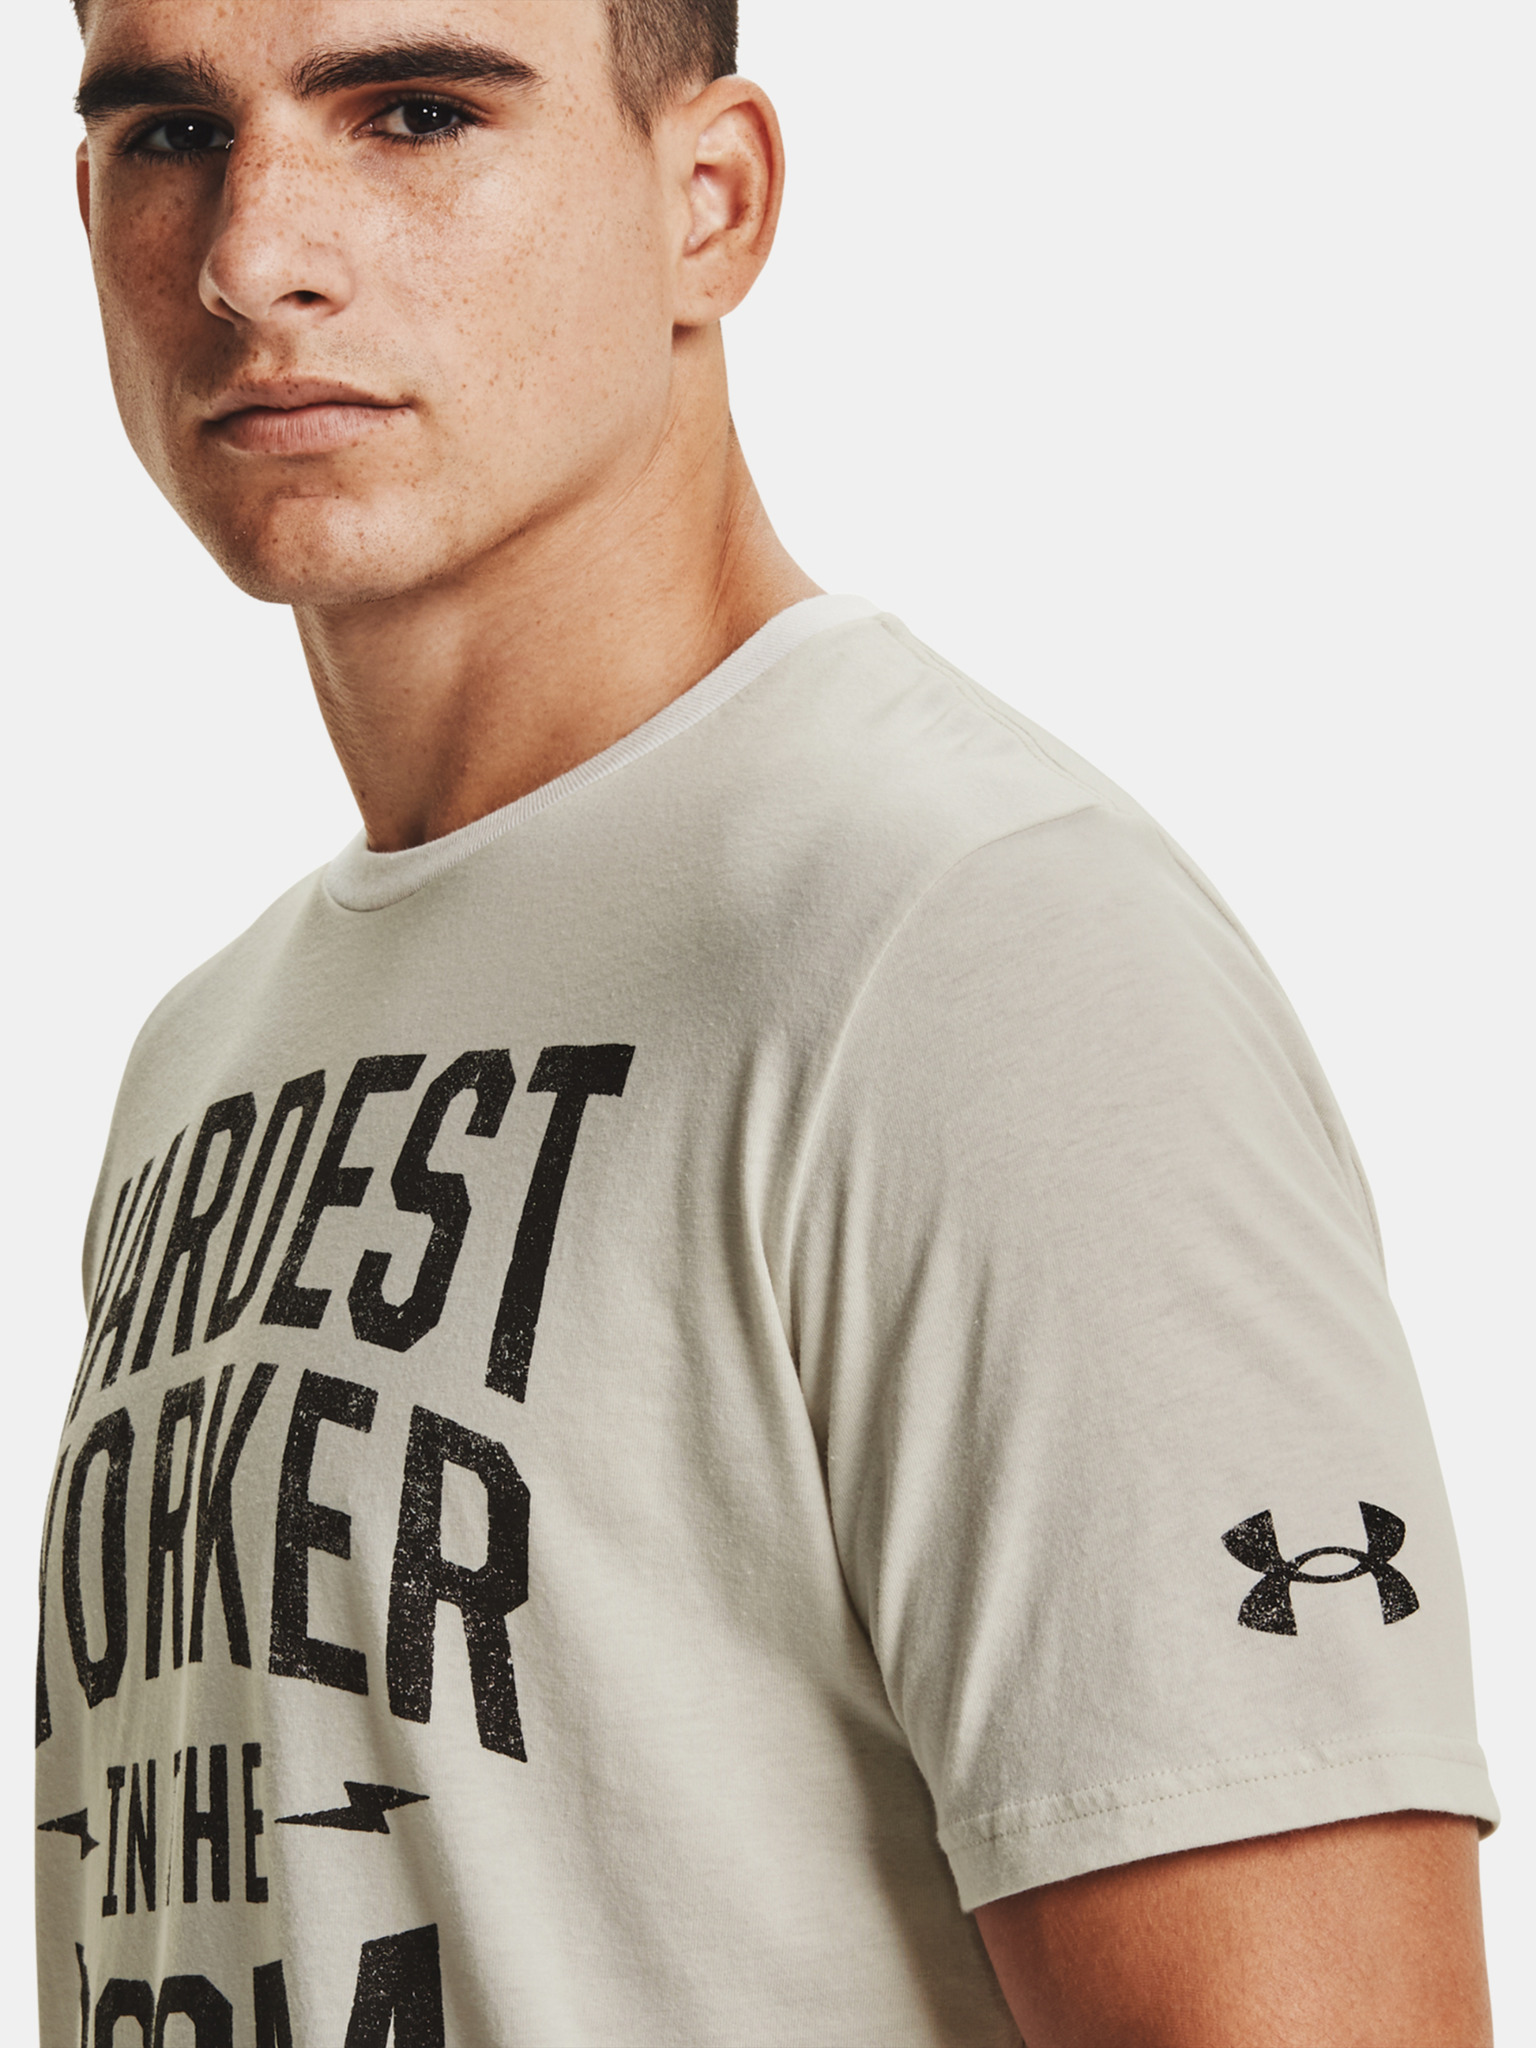 Under Armour - Elevated T-shirt